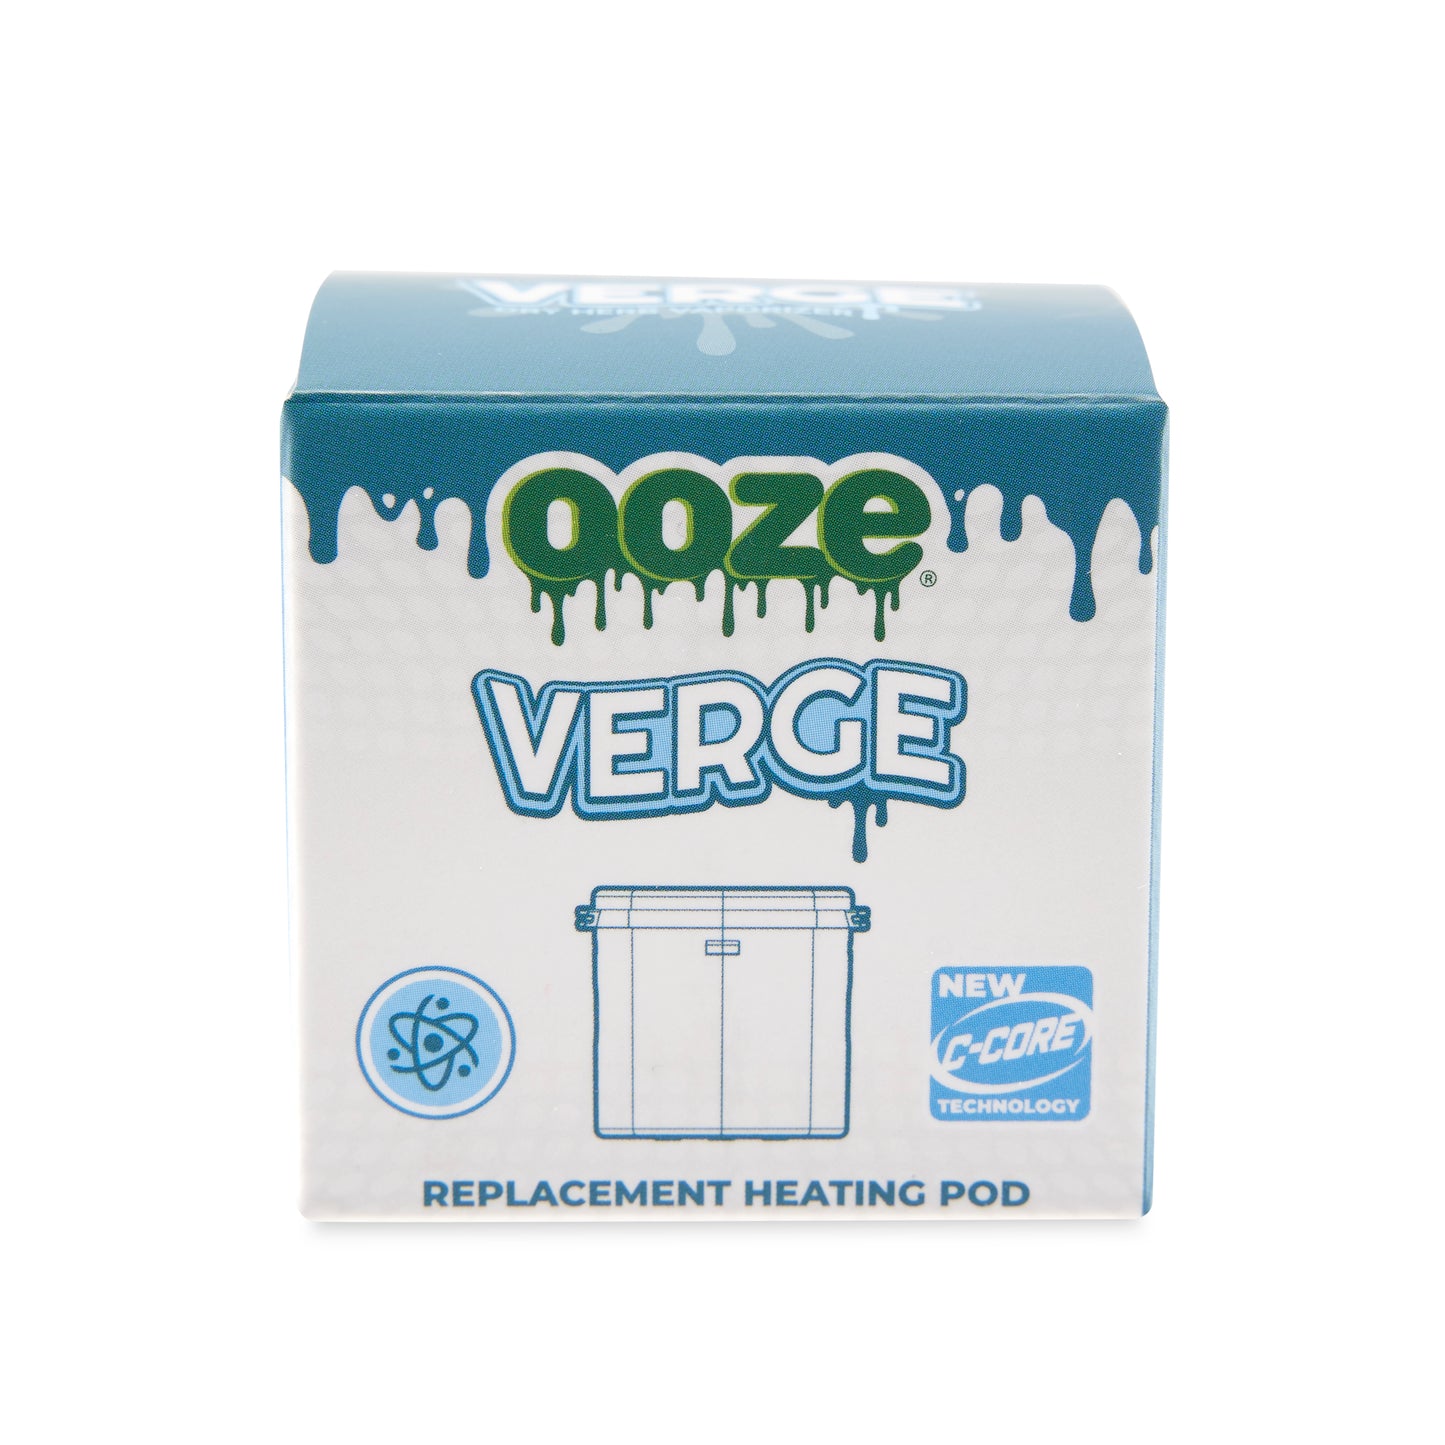 The front of the Ooze Verge replacement heating pod.